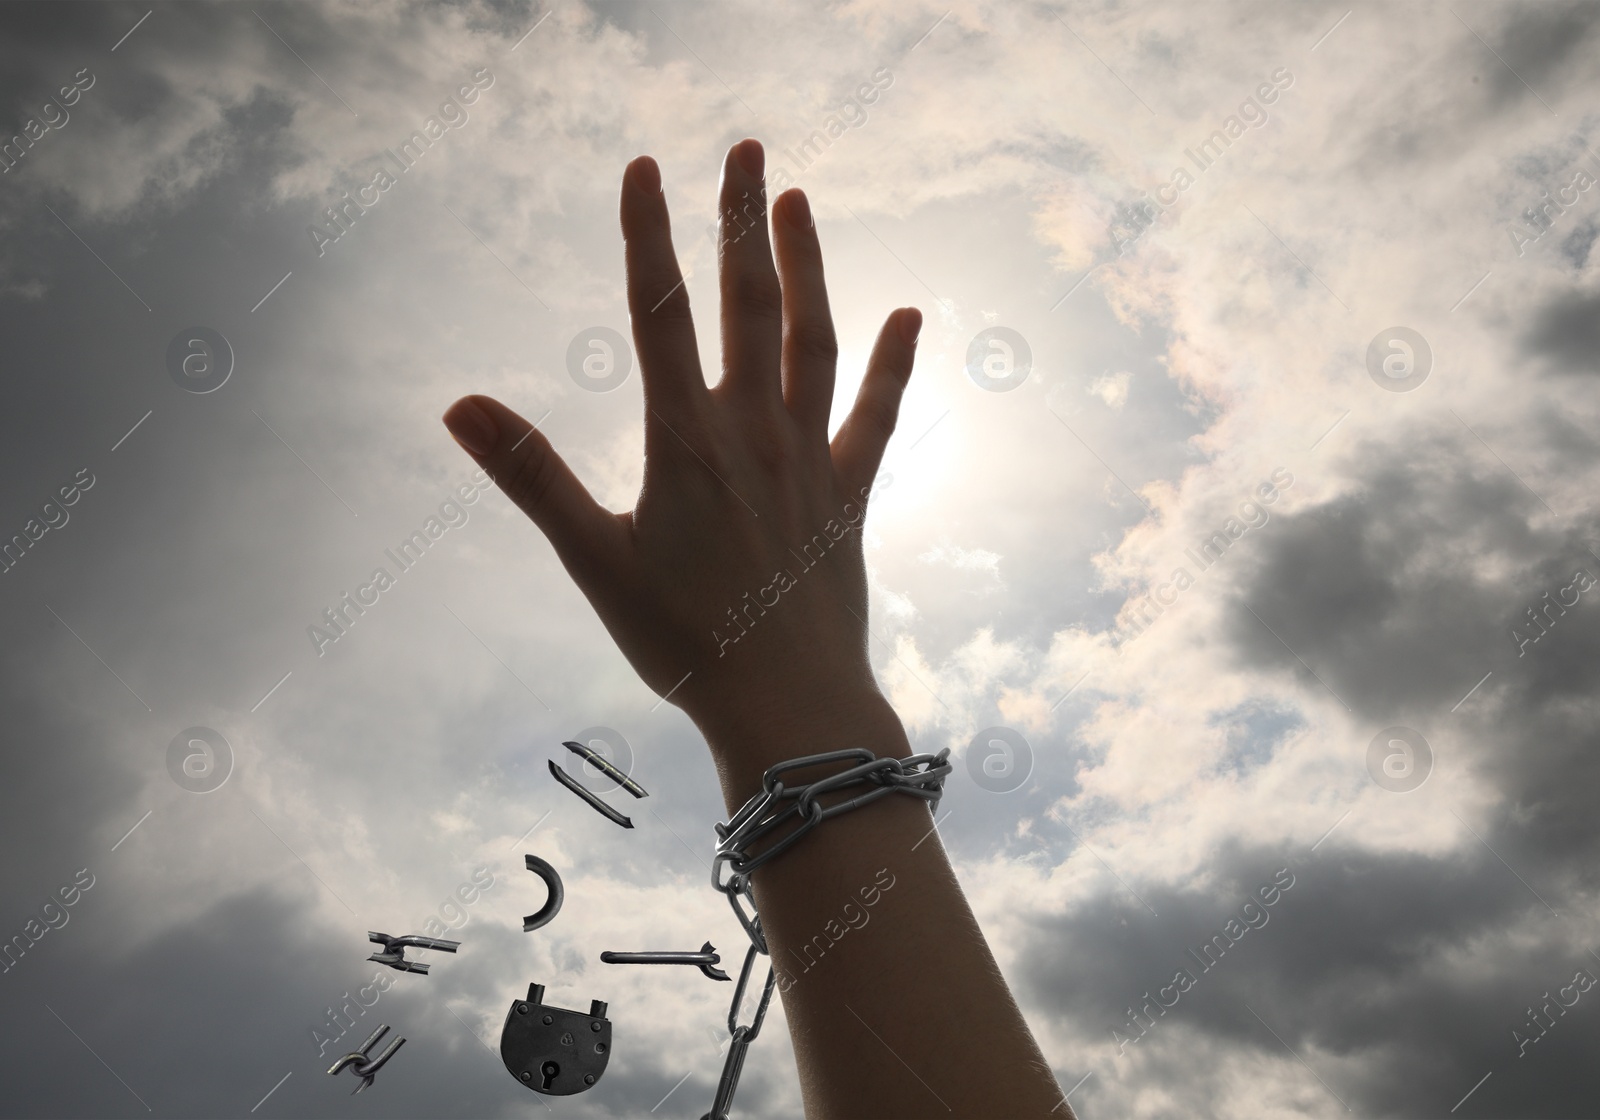 Image of Freedom. Woman with broken chain against cloudy sky, closeup